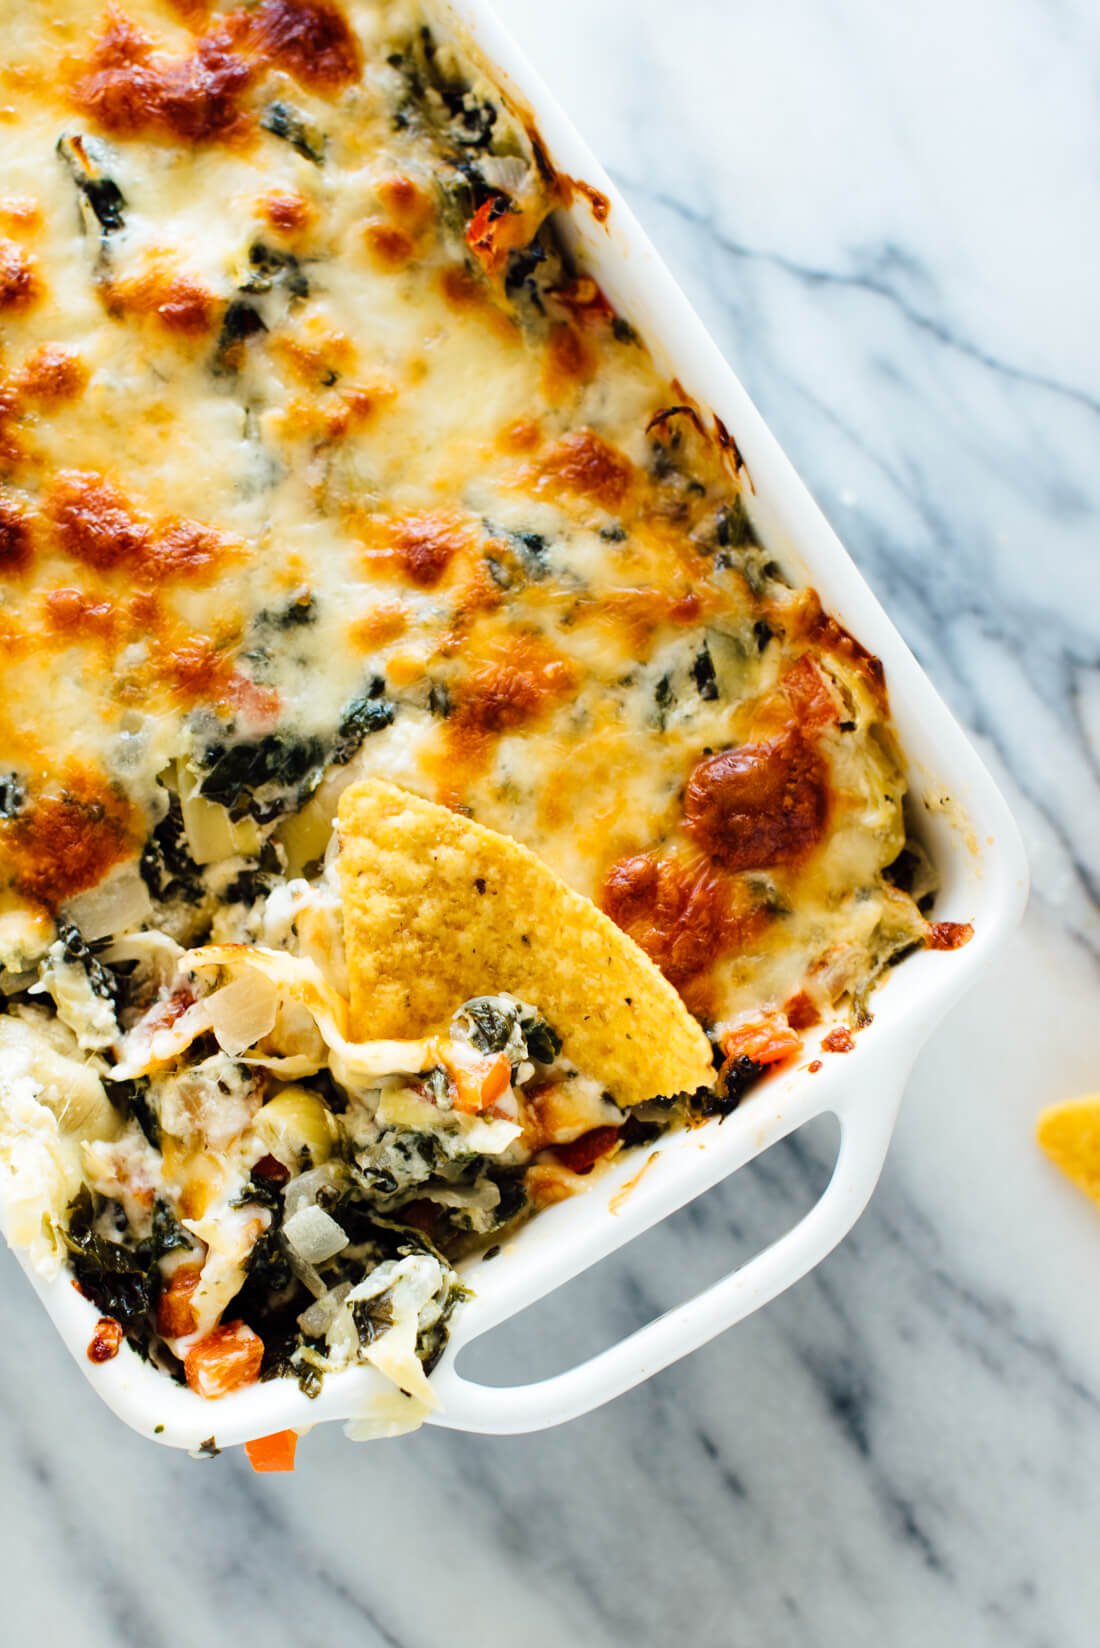 Baked Spinach Artichoke Dip Recipe - Cookie and Kate